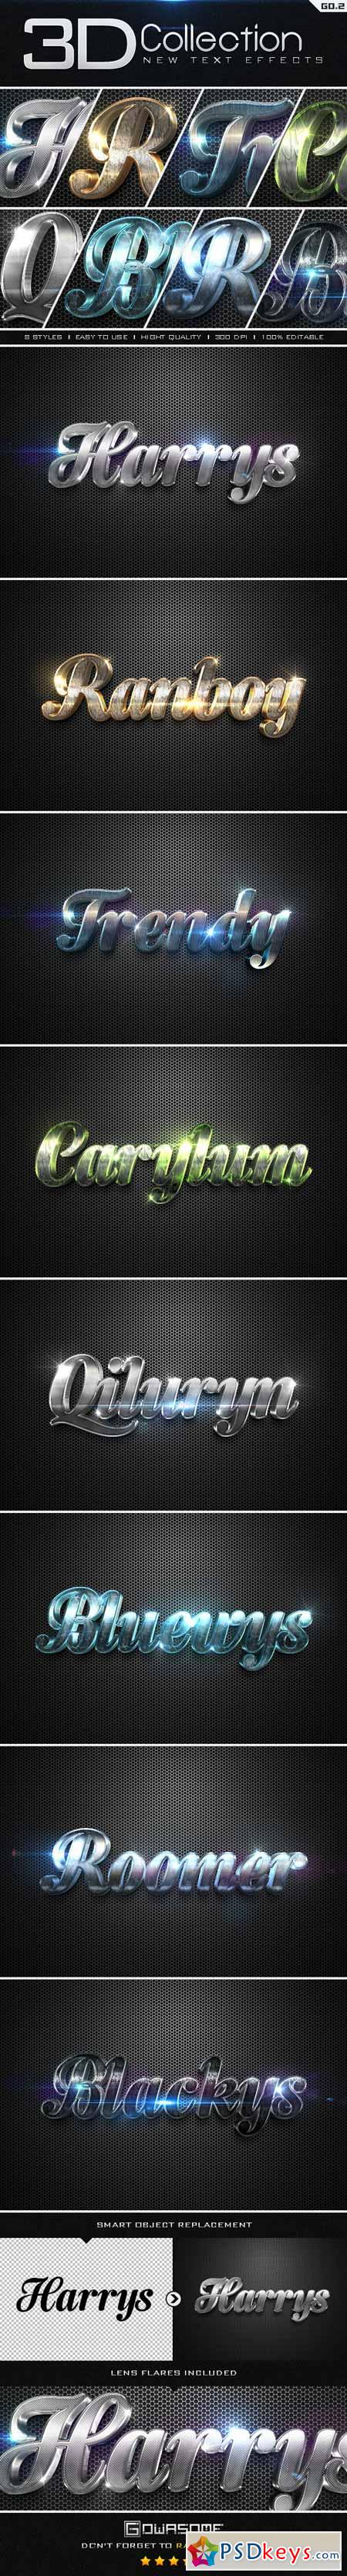 New 3D Collection Text Effects GO.2 9609990